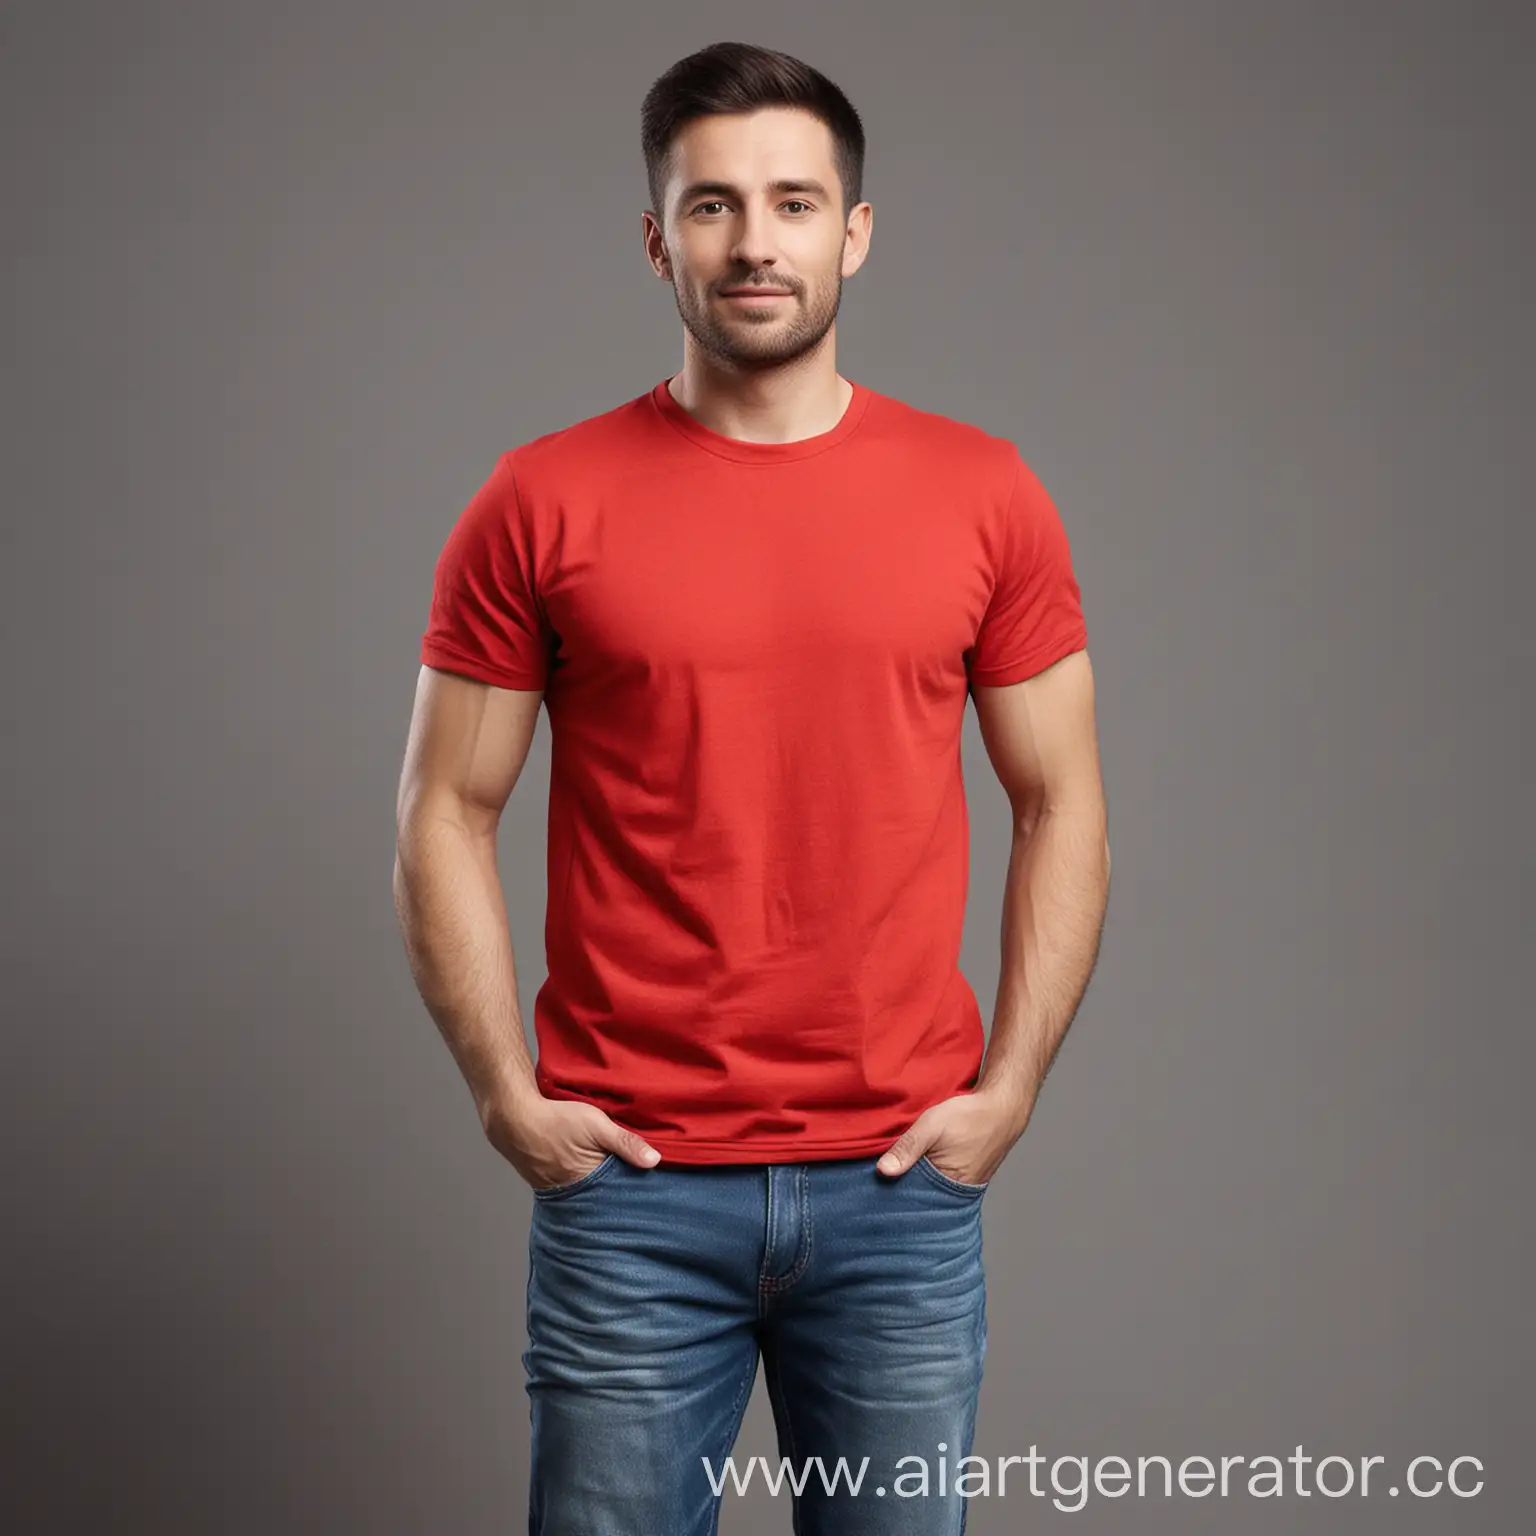 Confident-Man-in-Red-TShirt-on-Neutral-Background